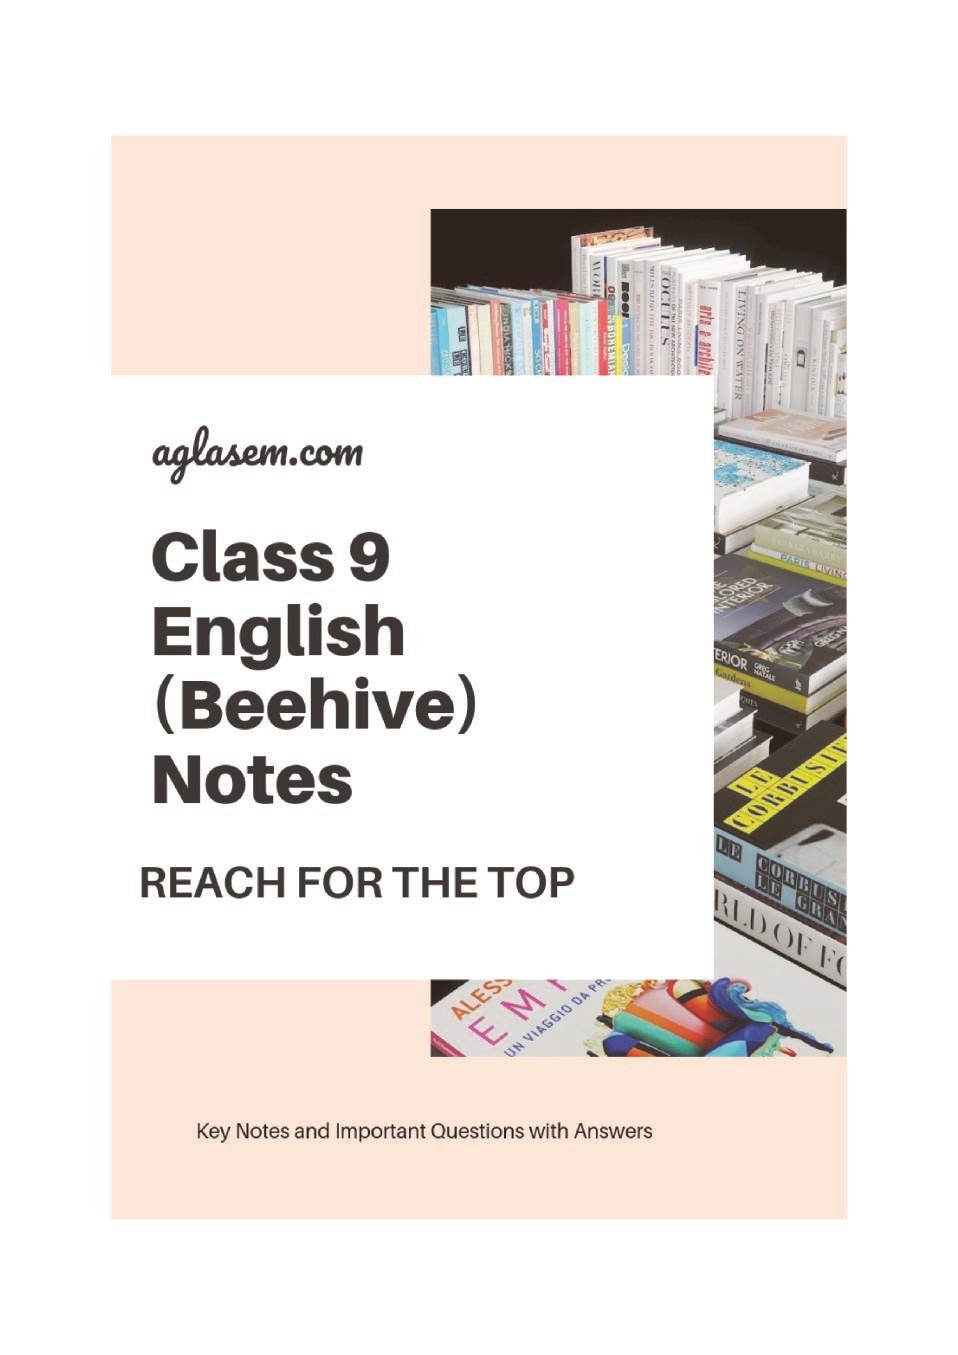 Class 9 English Beehive Notes For Reach for the Top - Page 1